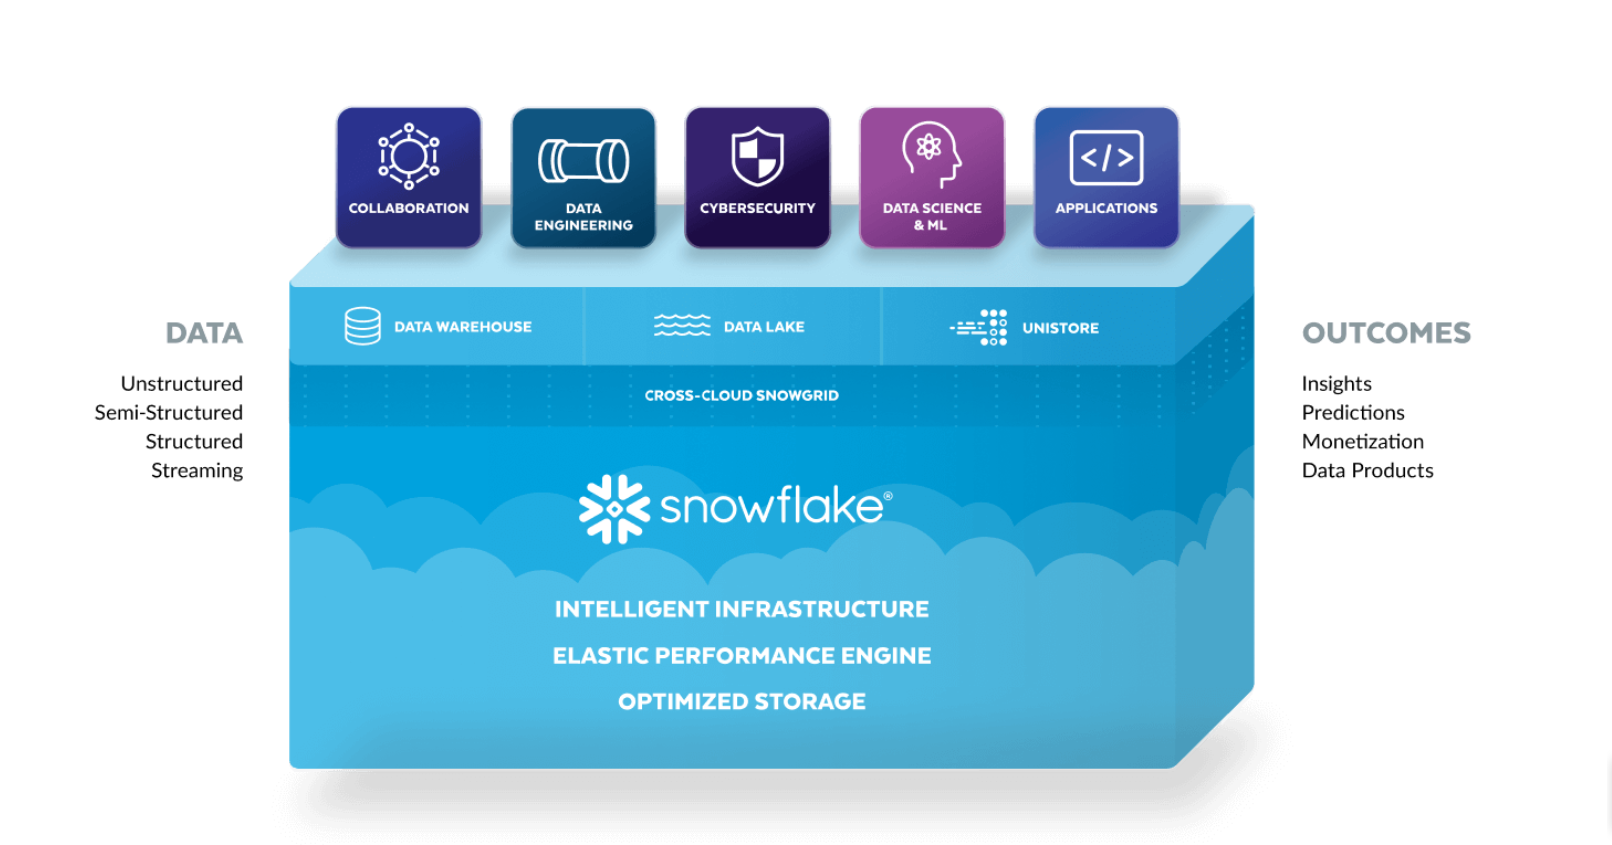 Connect Alteryx to Snowflake Tool (2 Easy Ways to Pull Data)